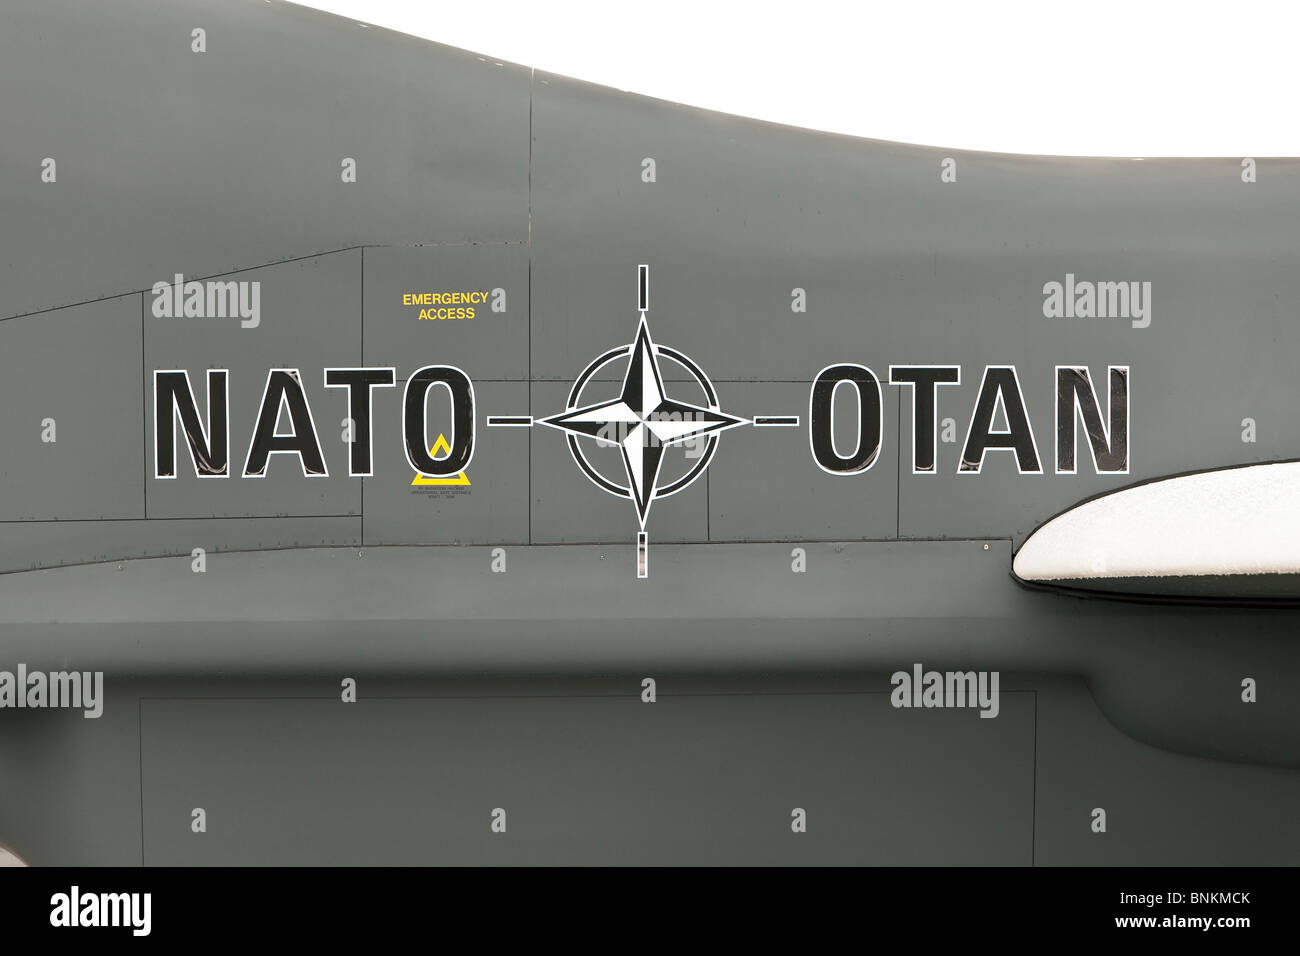 NATO logo on the side of an aircraft Stock Photo